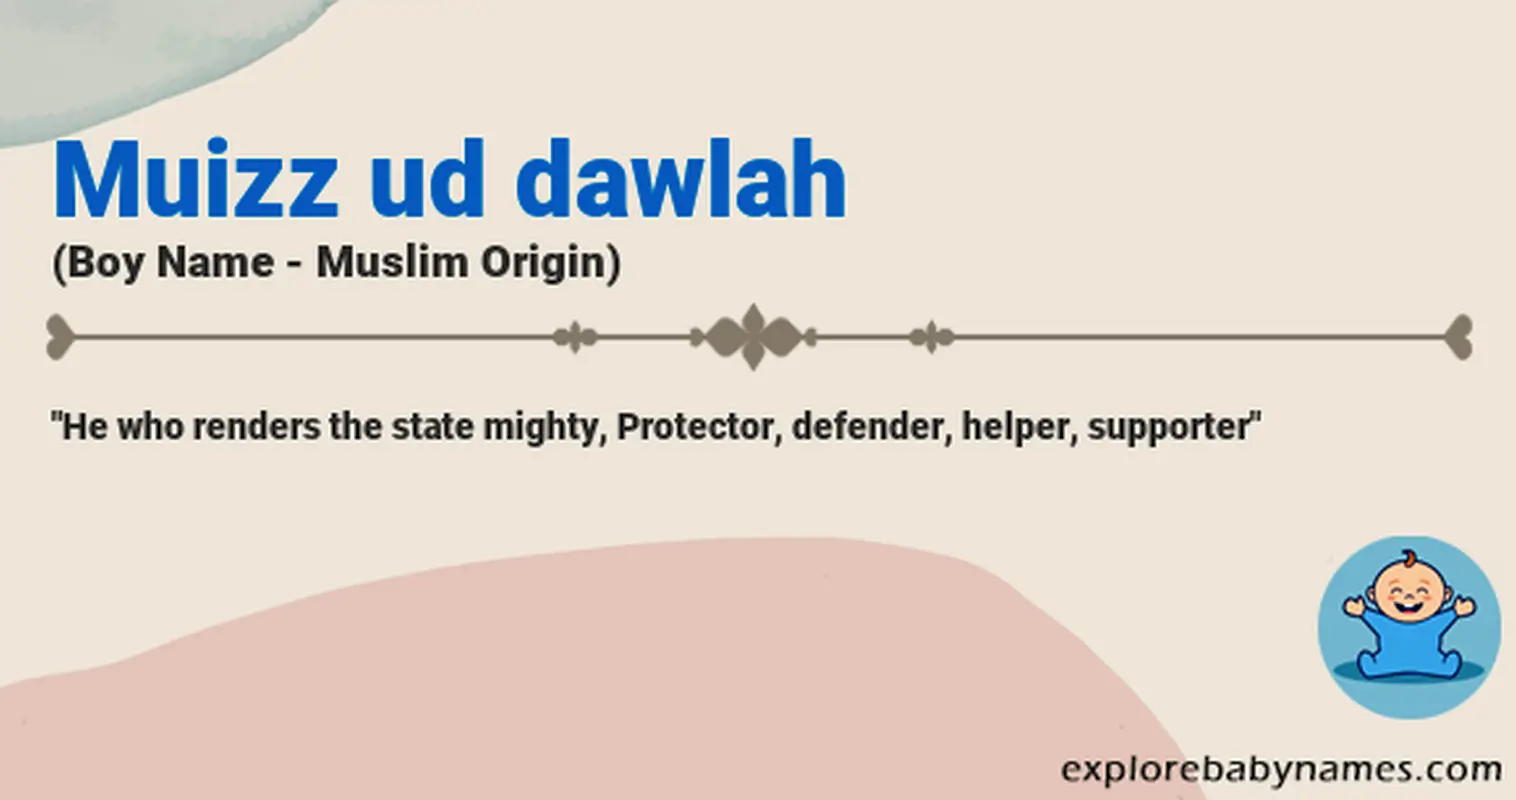 Meaning of Muizz ud dawlah